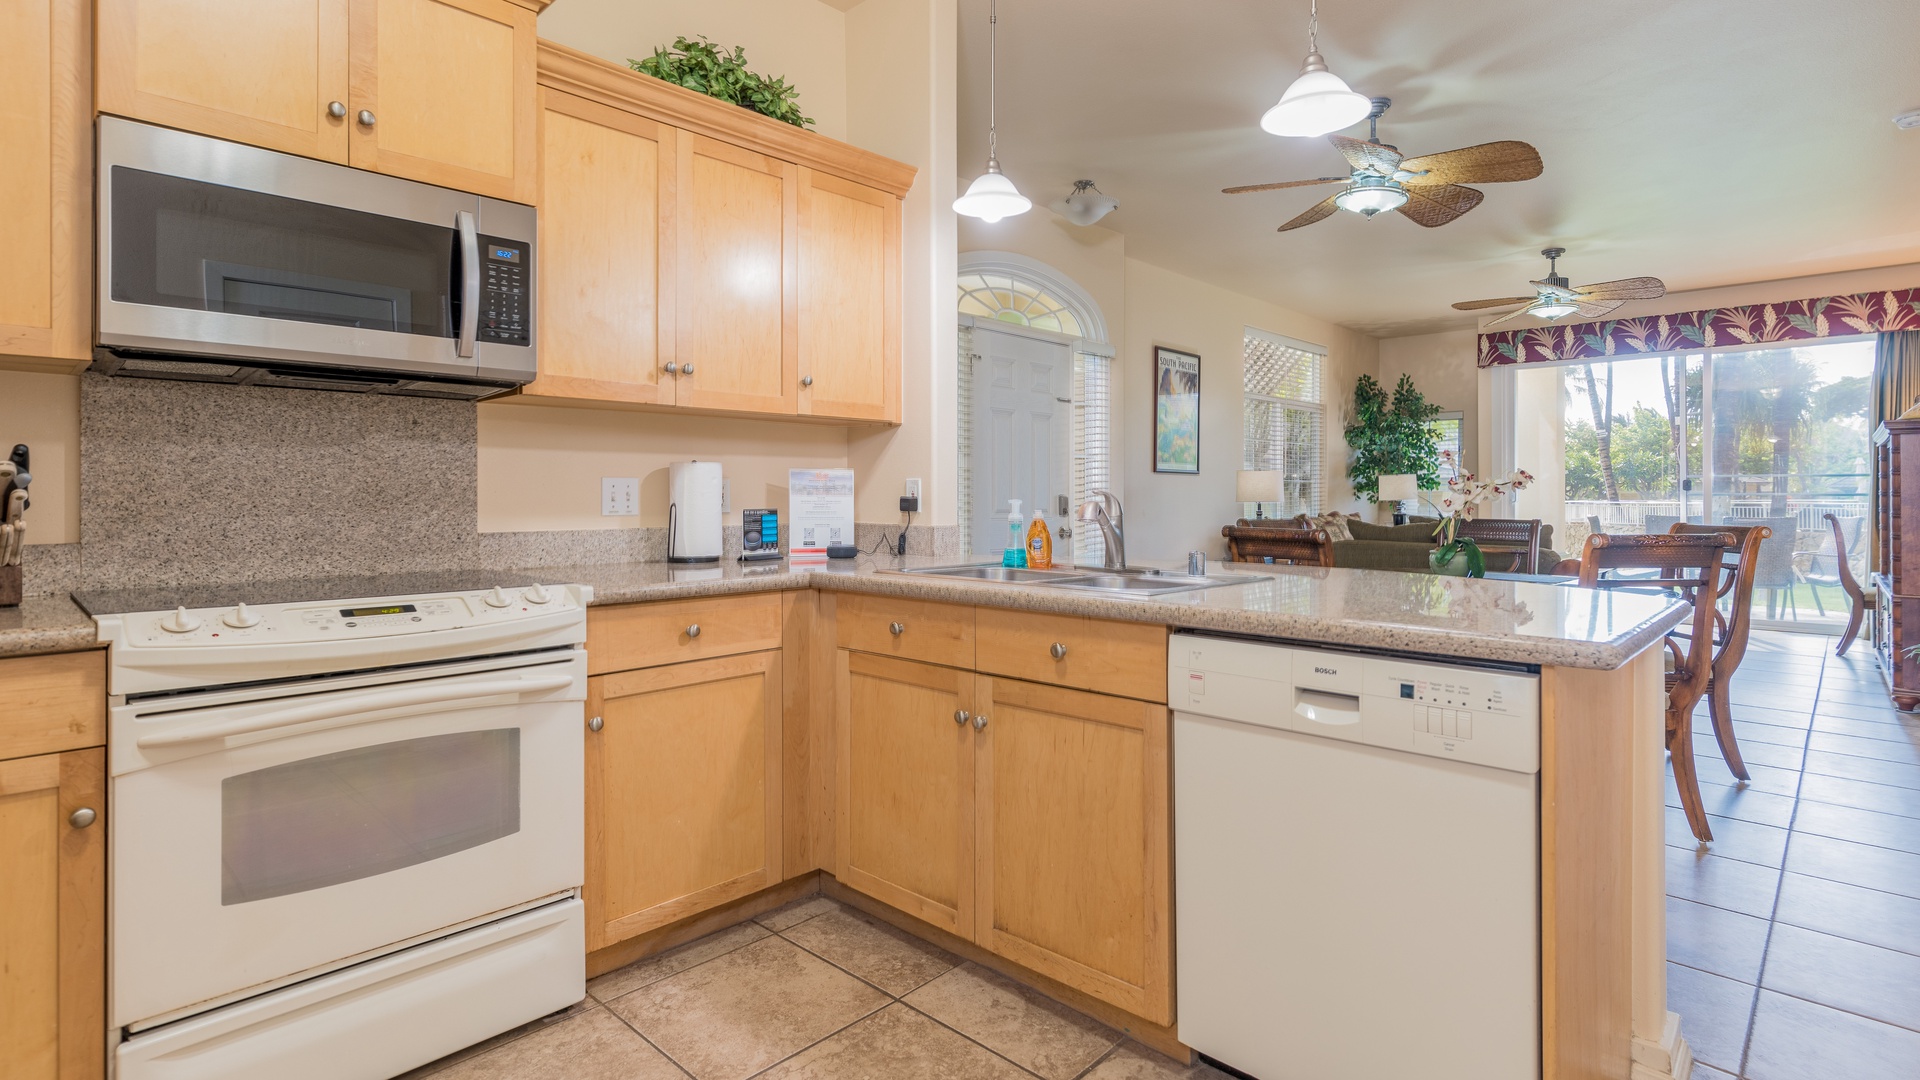 Kapolei Vacation Rentals, Kai Lani 8B - The bright kitchen features many amenities including a fridge, oven, spacious counter tops and high ceilings.